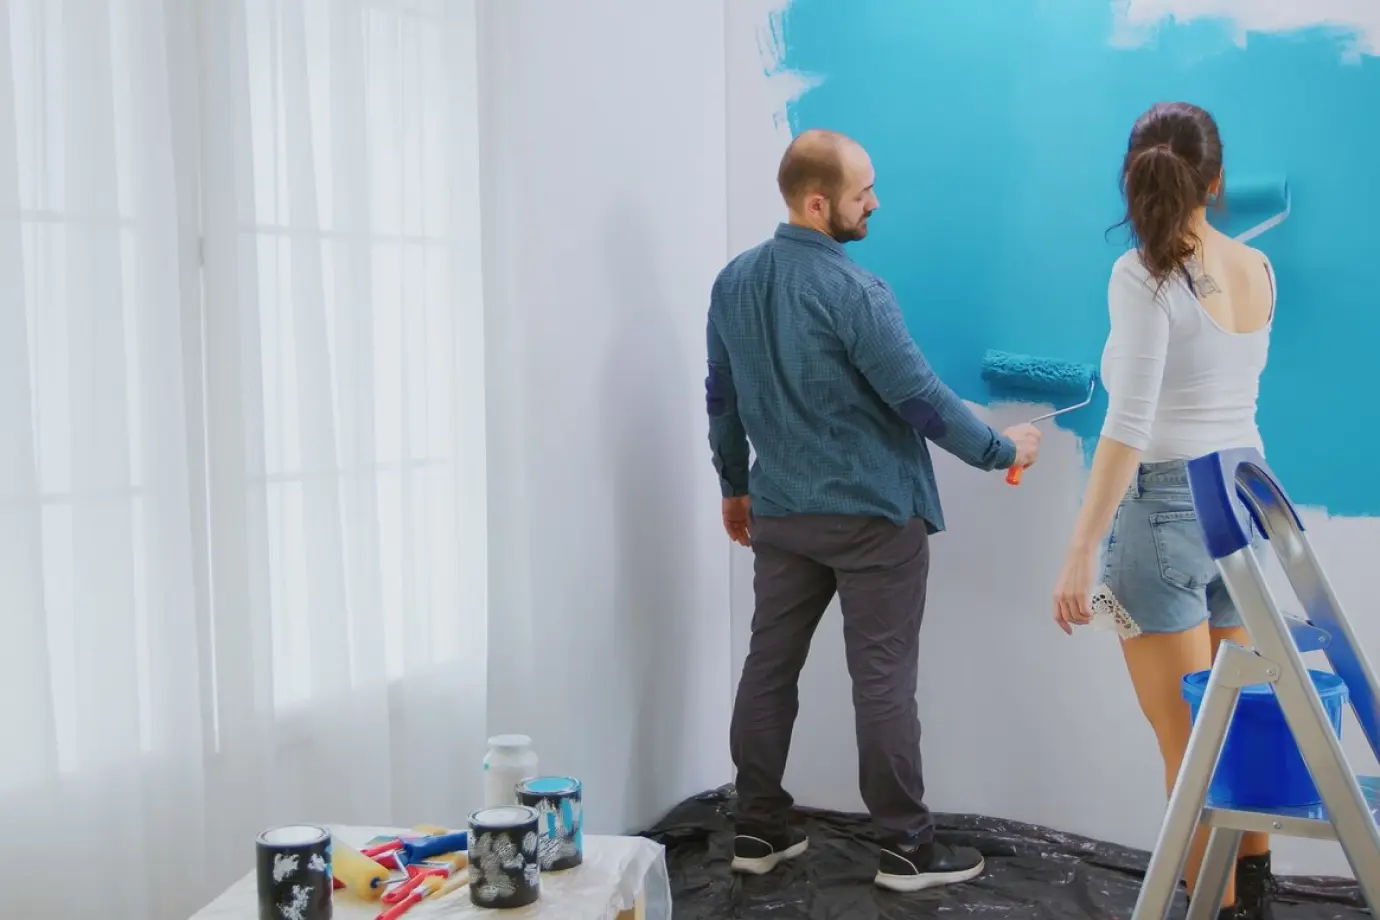 A-couple-painting-a-wall-blue-man-holds-roller-up-high-woman-reaches-for-roller-both-standing-on-plastic-covered-floor